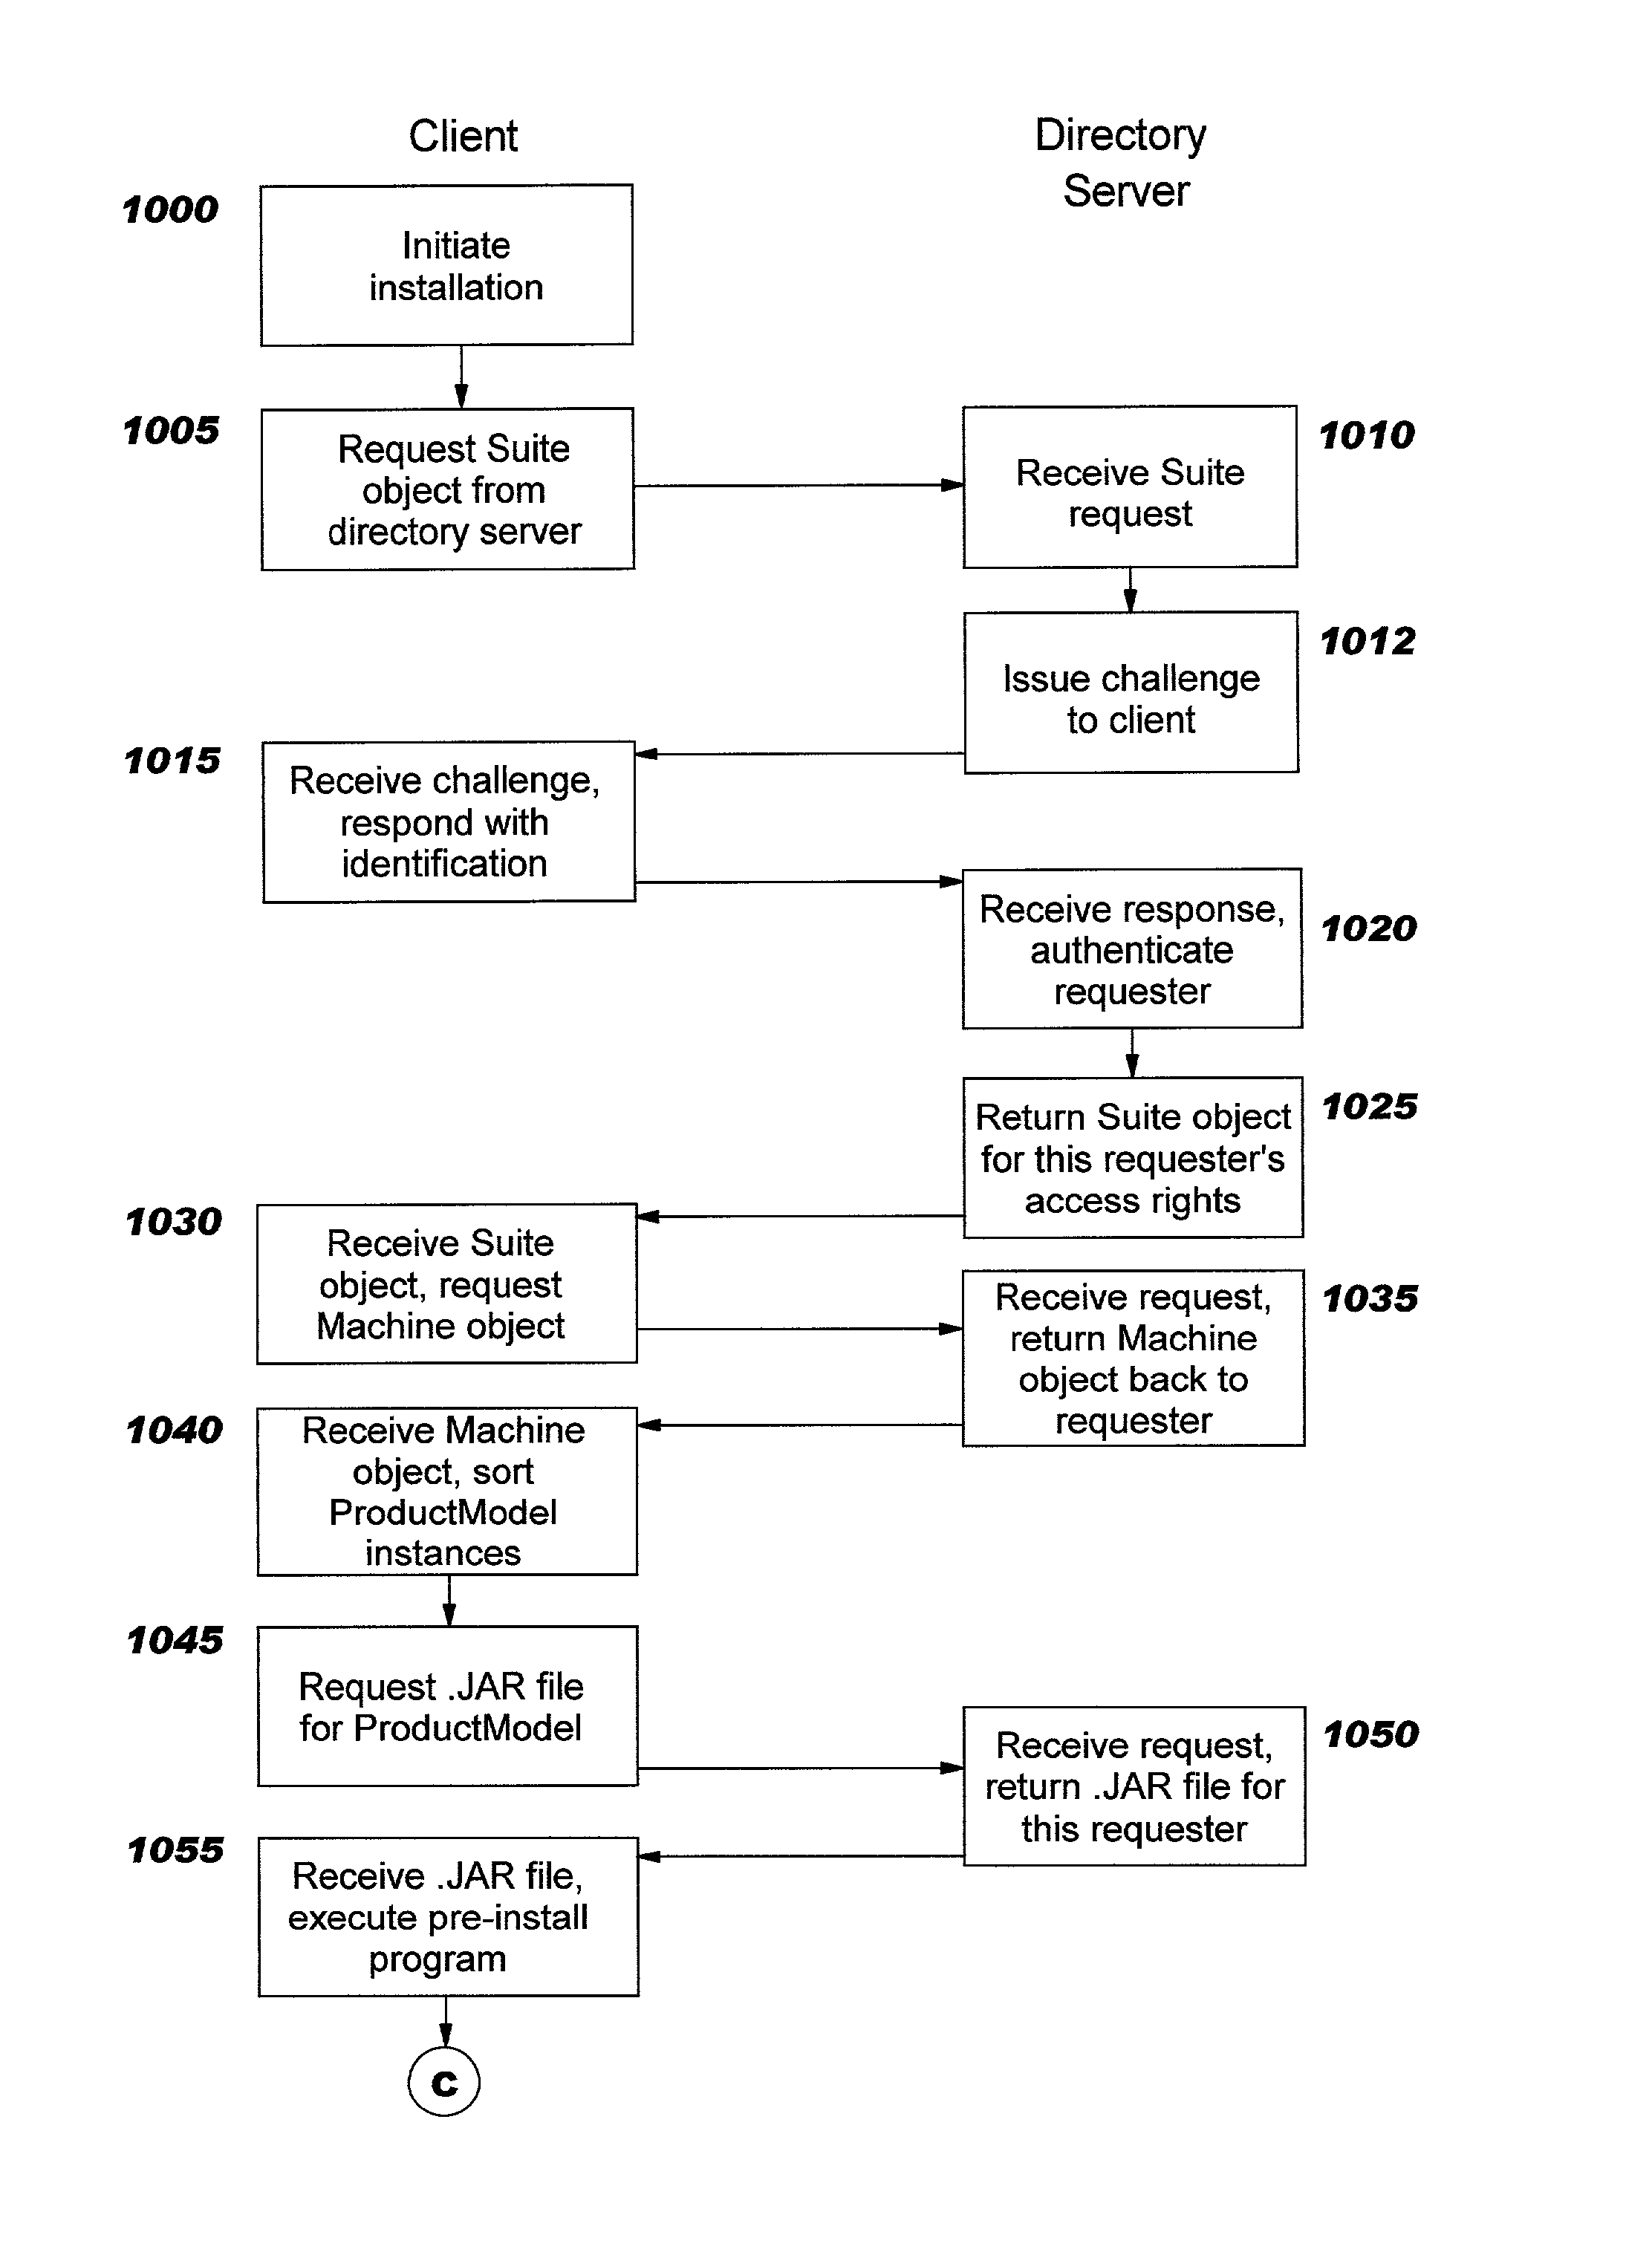 Object model and framework for installation of software packages using a distributed directory